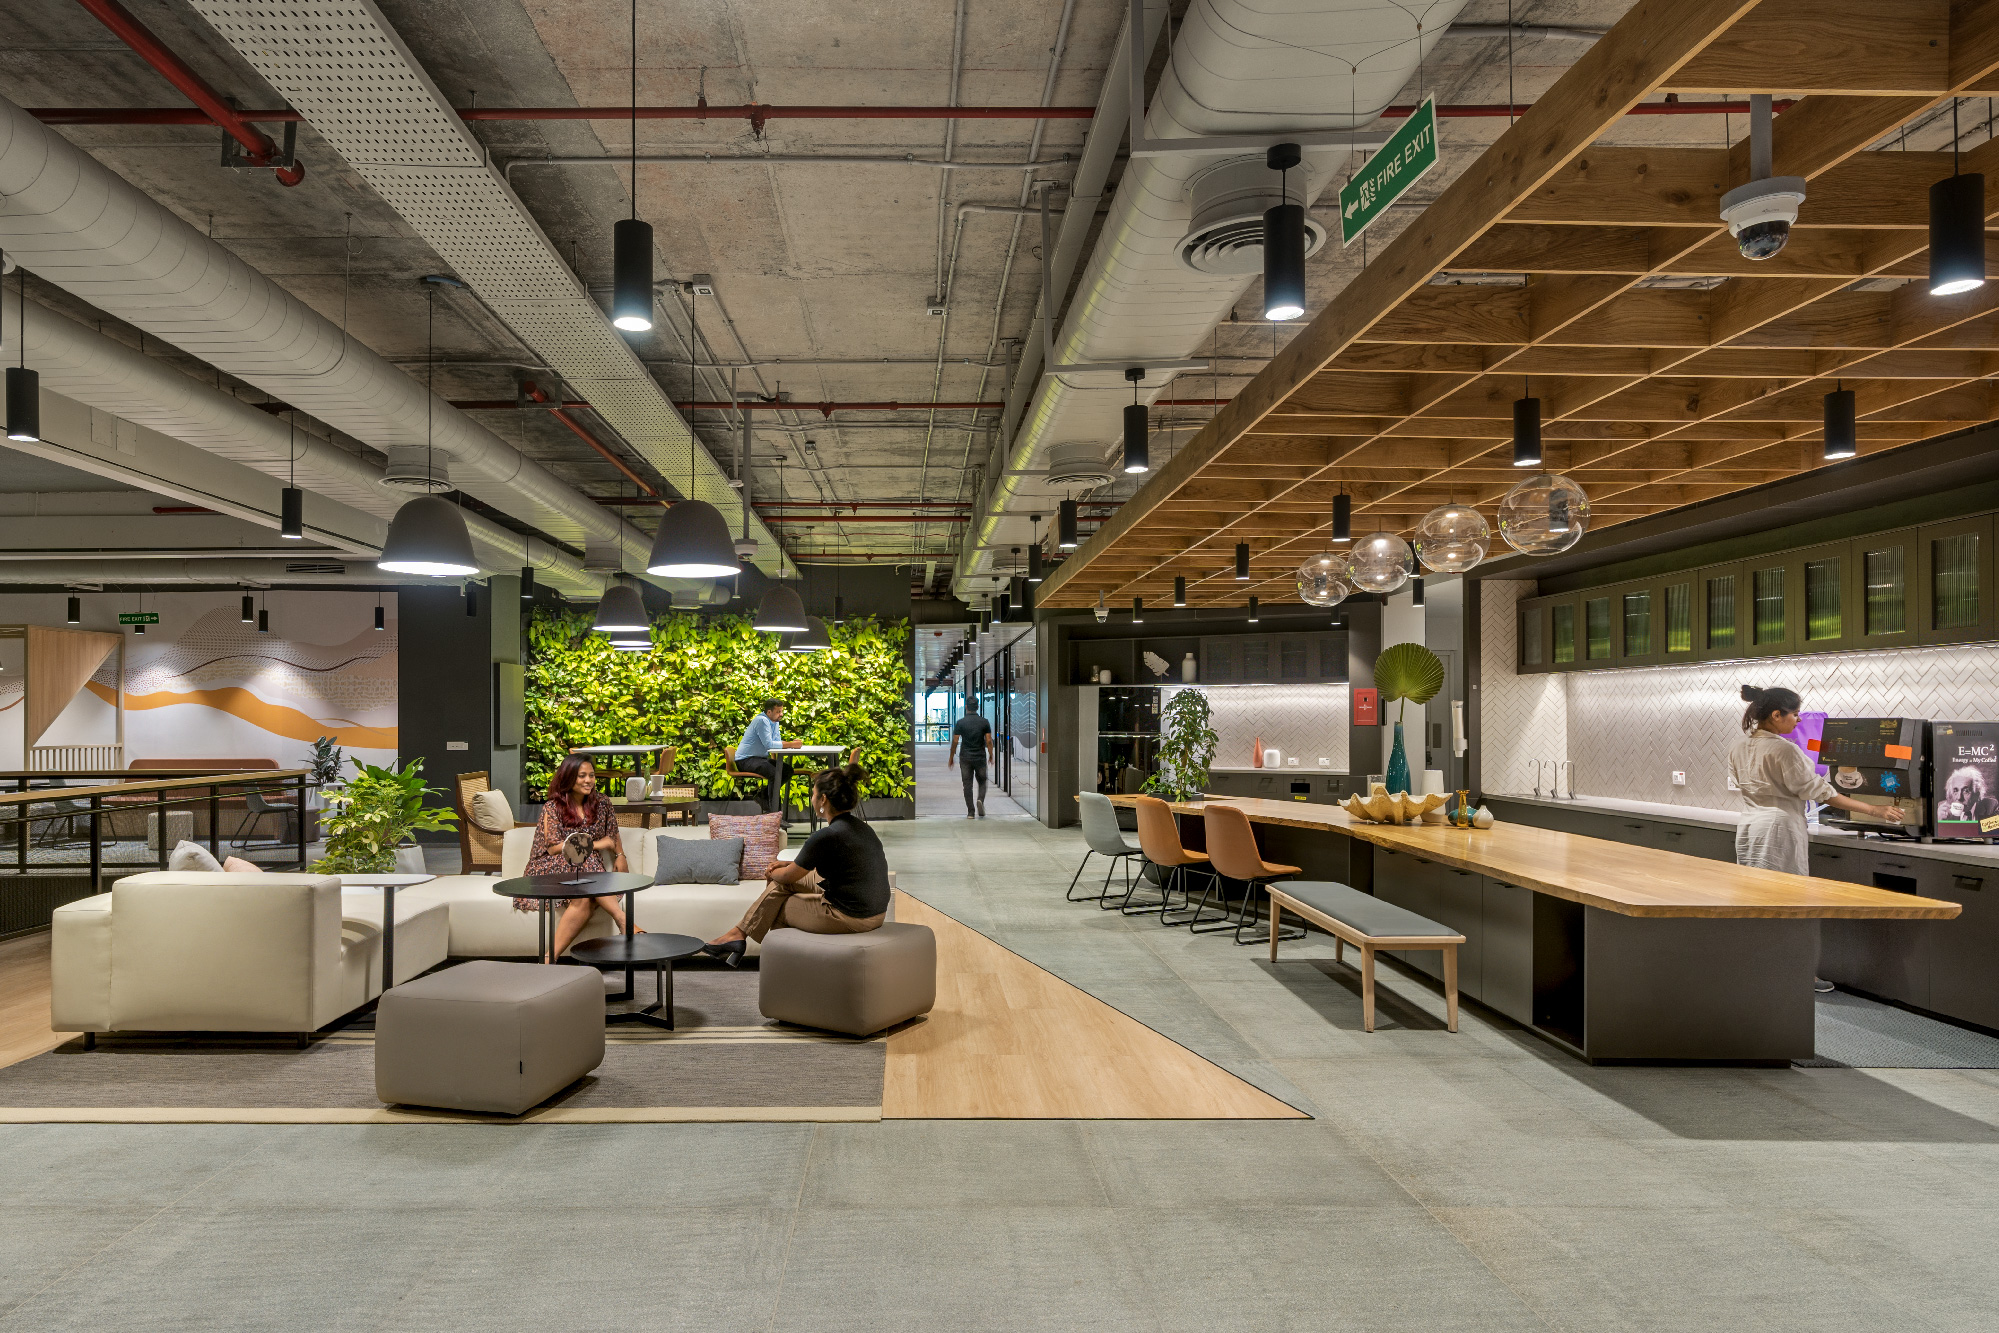 employee-focused workspace designed by Space.